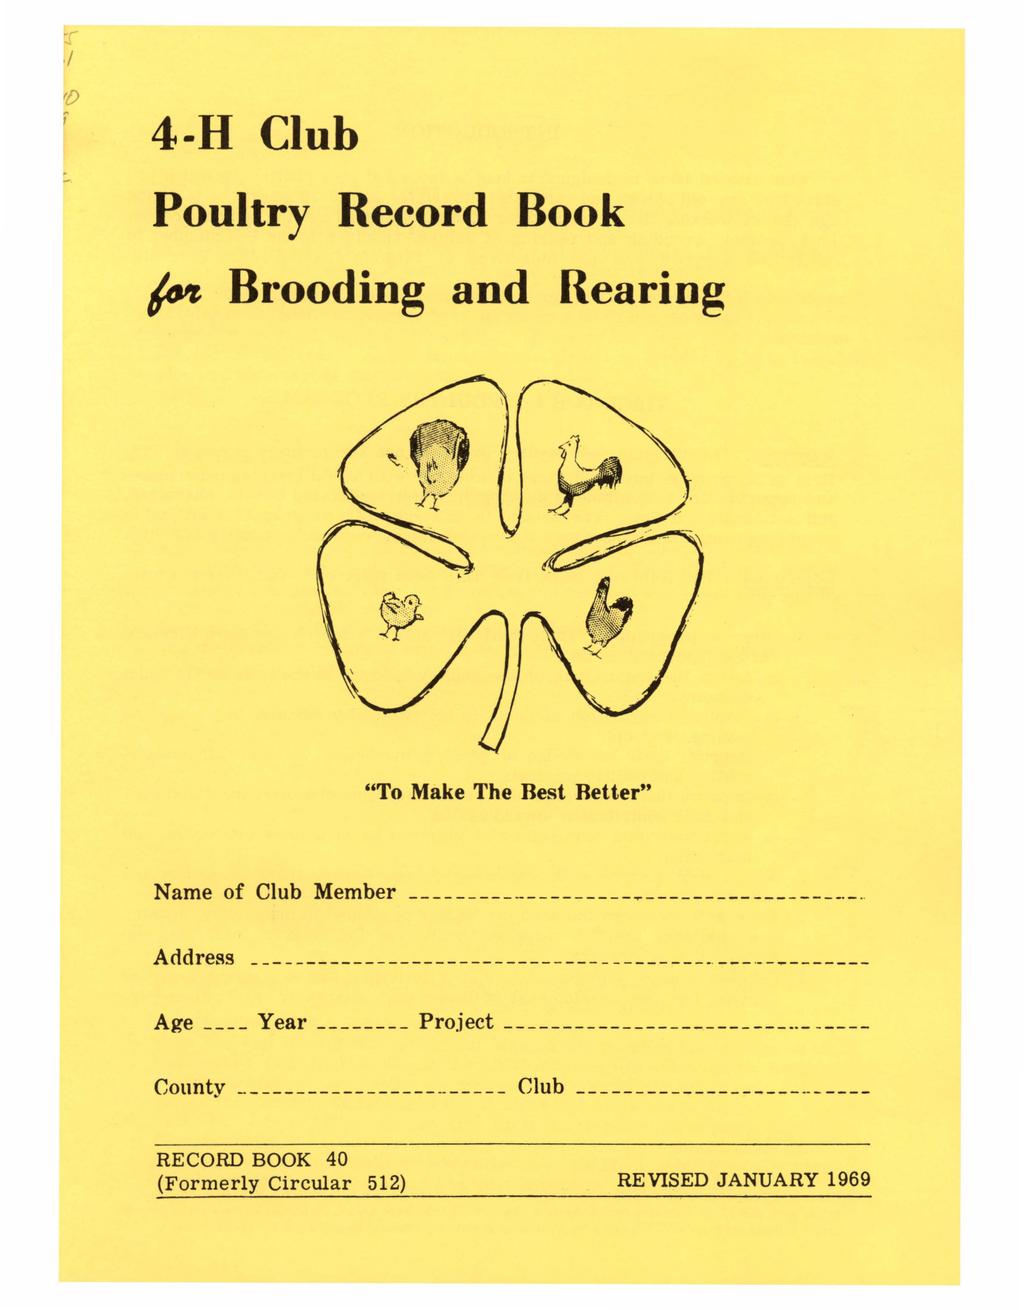 4-H Club Poultry Record Book /o'r- Brooding and Rearing "To Make The Best Retter" Name of Club Member ----------------..---------- ---- - Address.